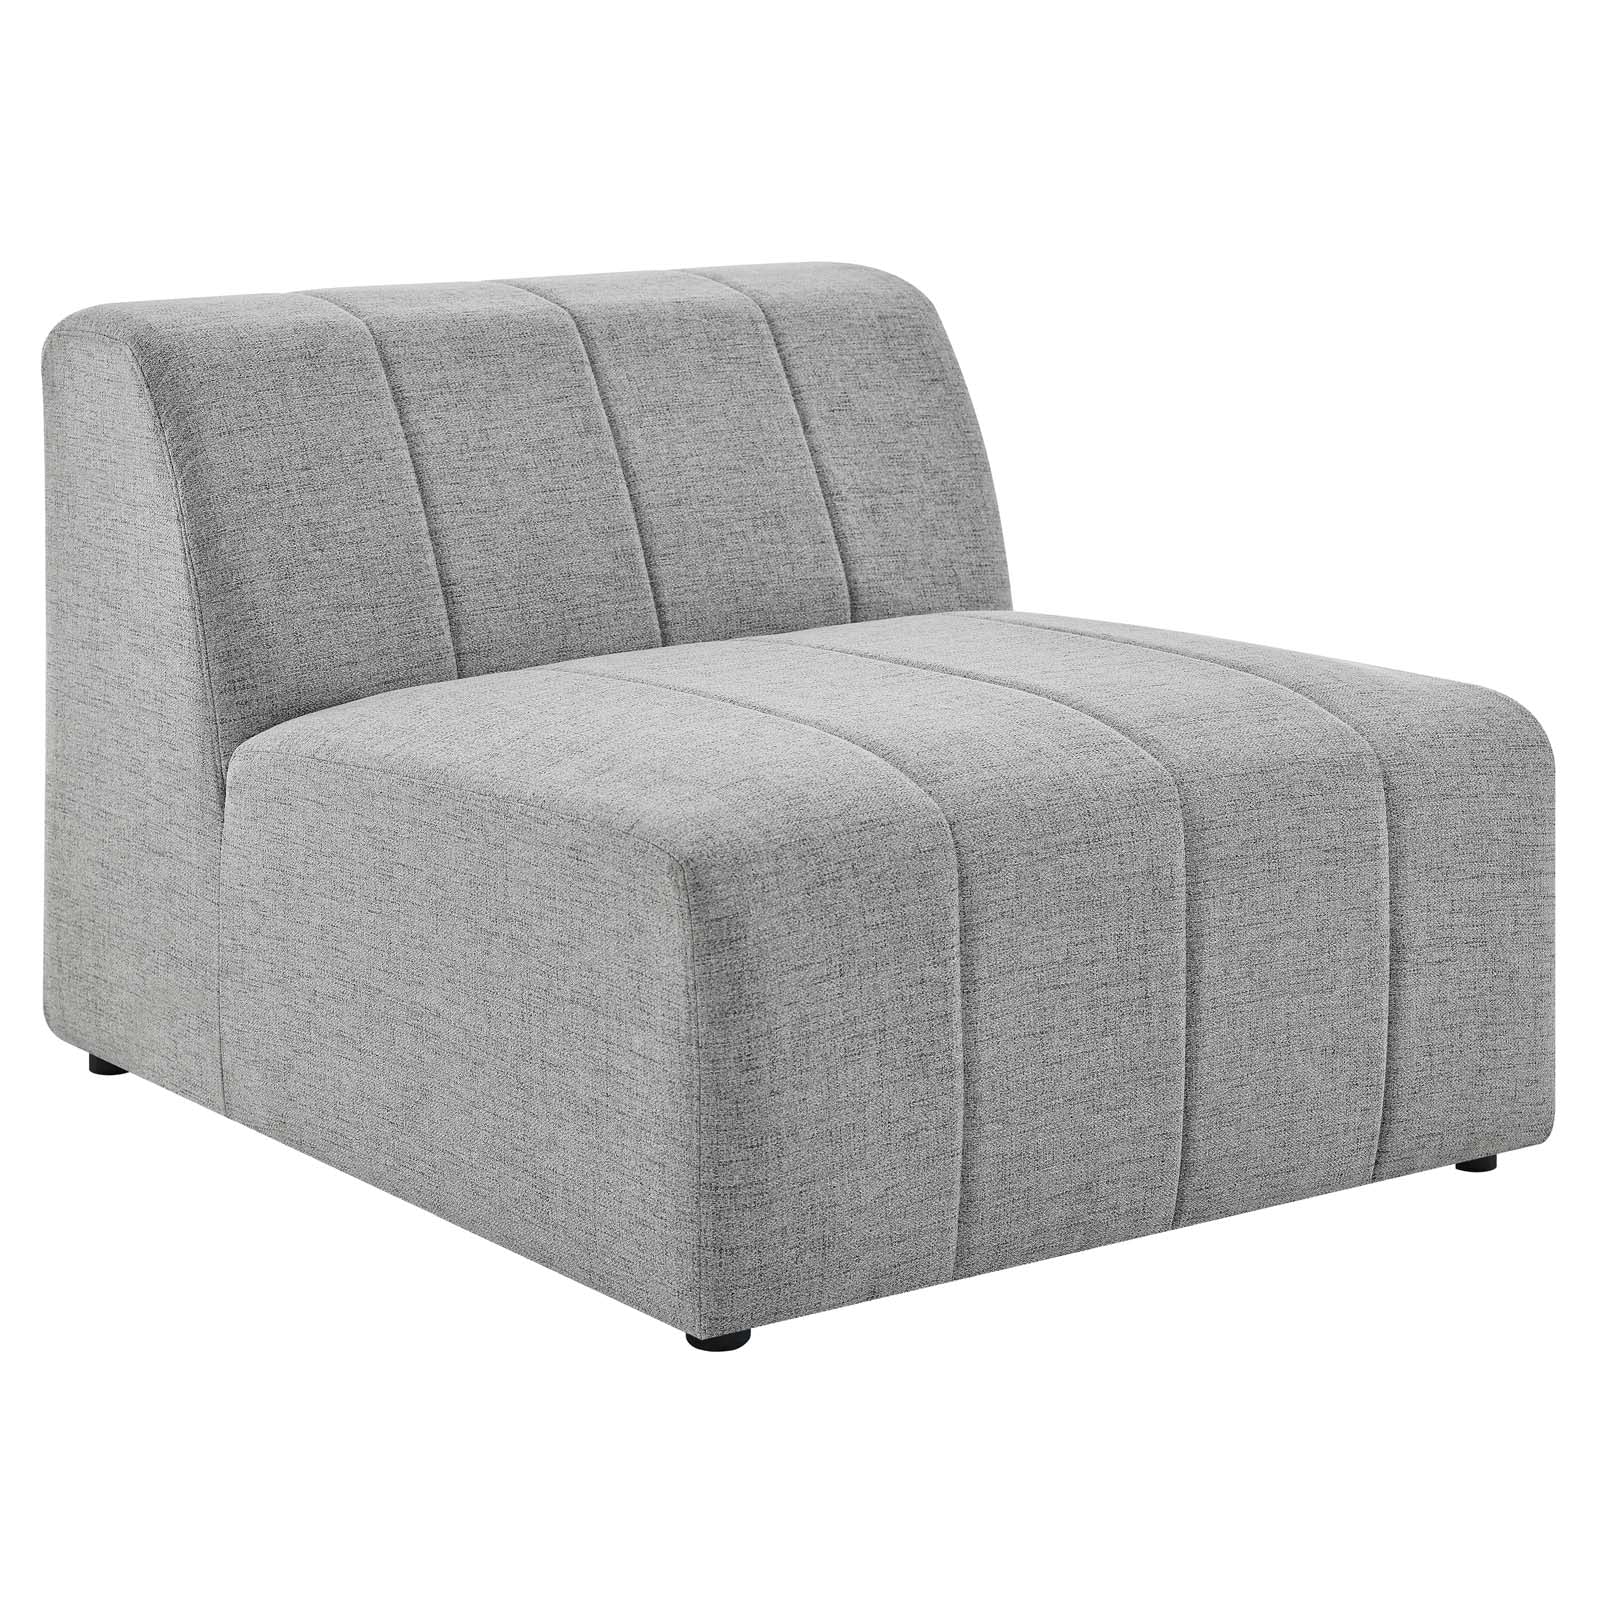 Modway Sectional Sofas - Bartlett Upholstered Fabric 8-Piece Sectional Sofa Light Gray